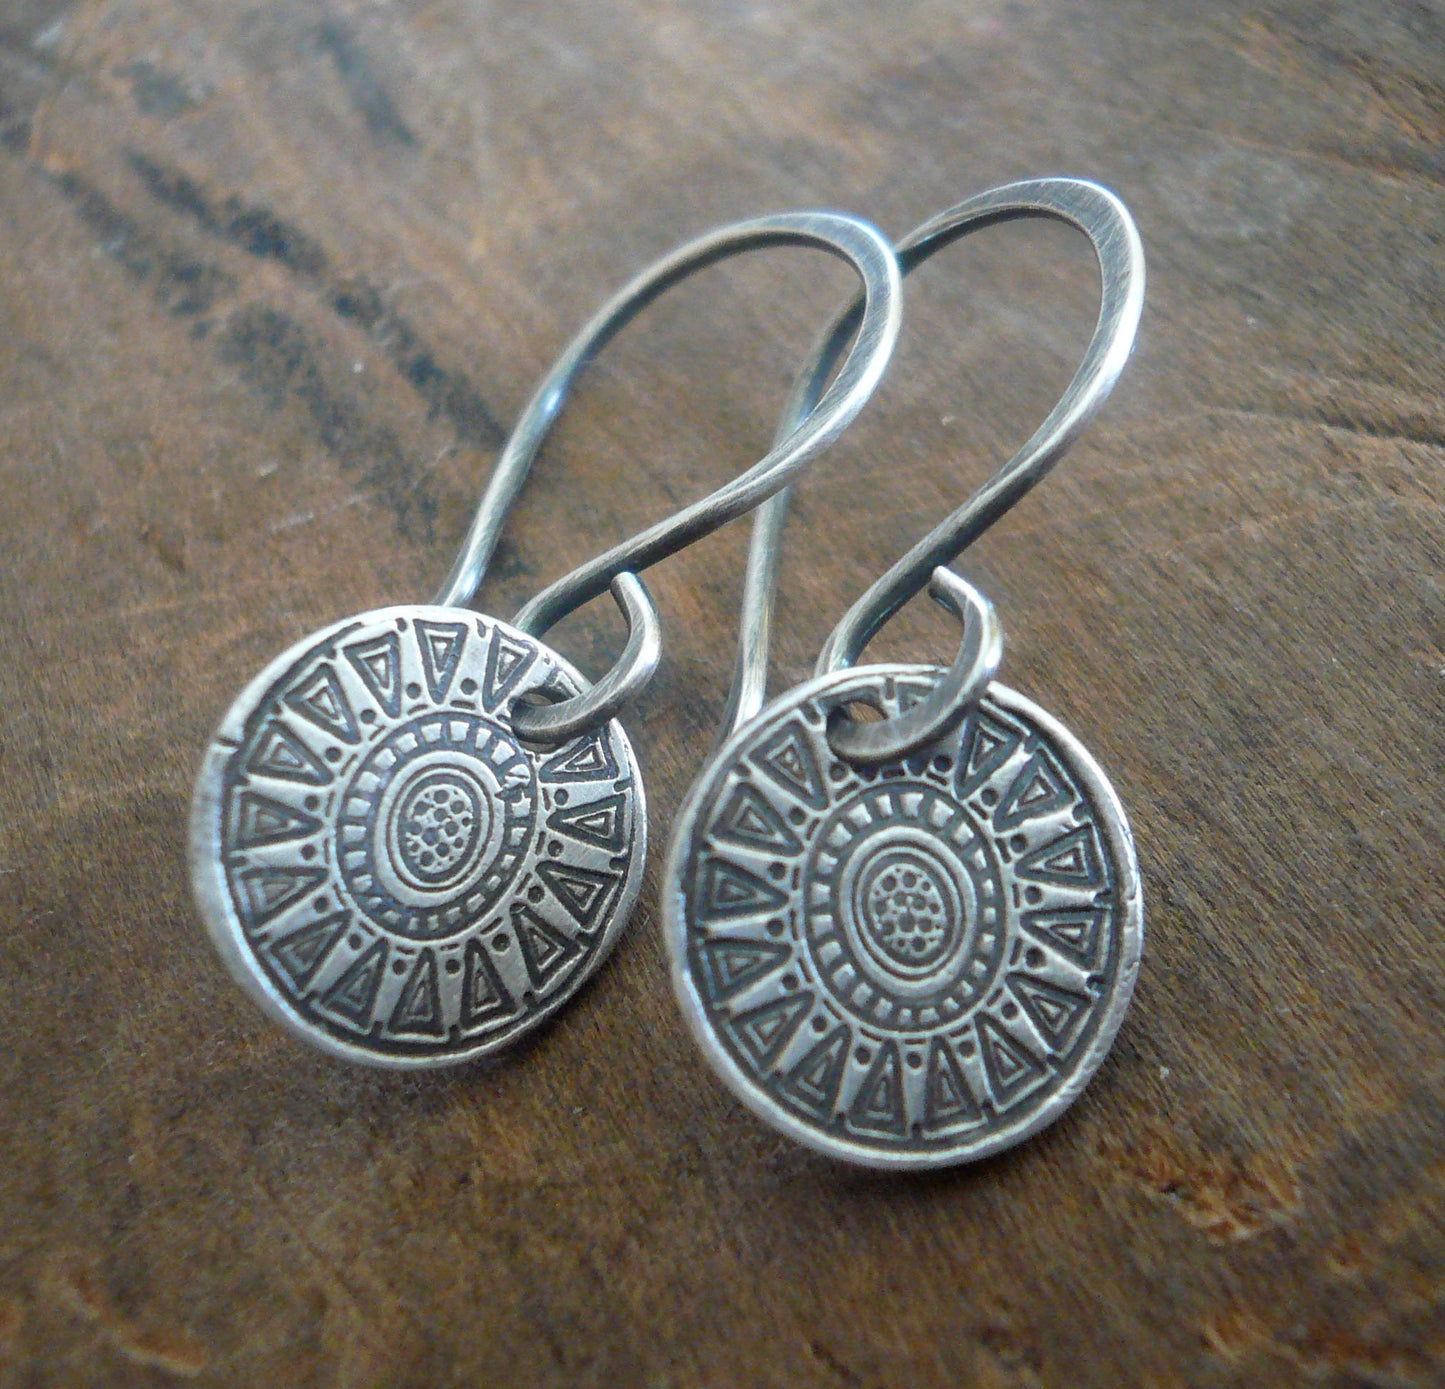 Medallion Earrings Small Style I - Handmade. Oxidized fine and sterling silver